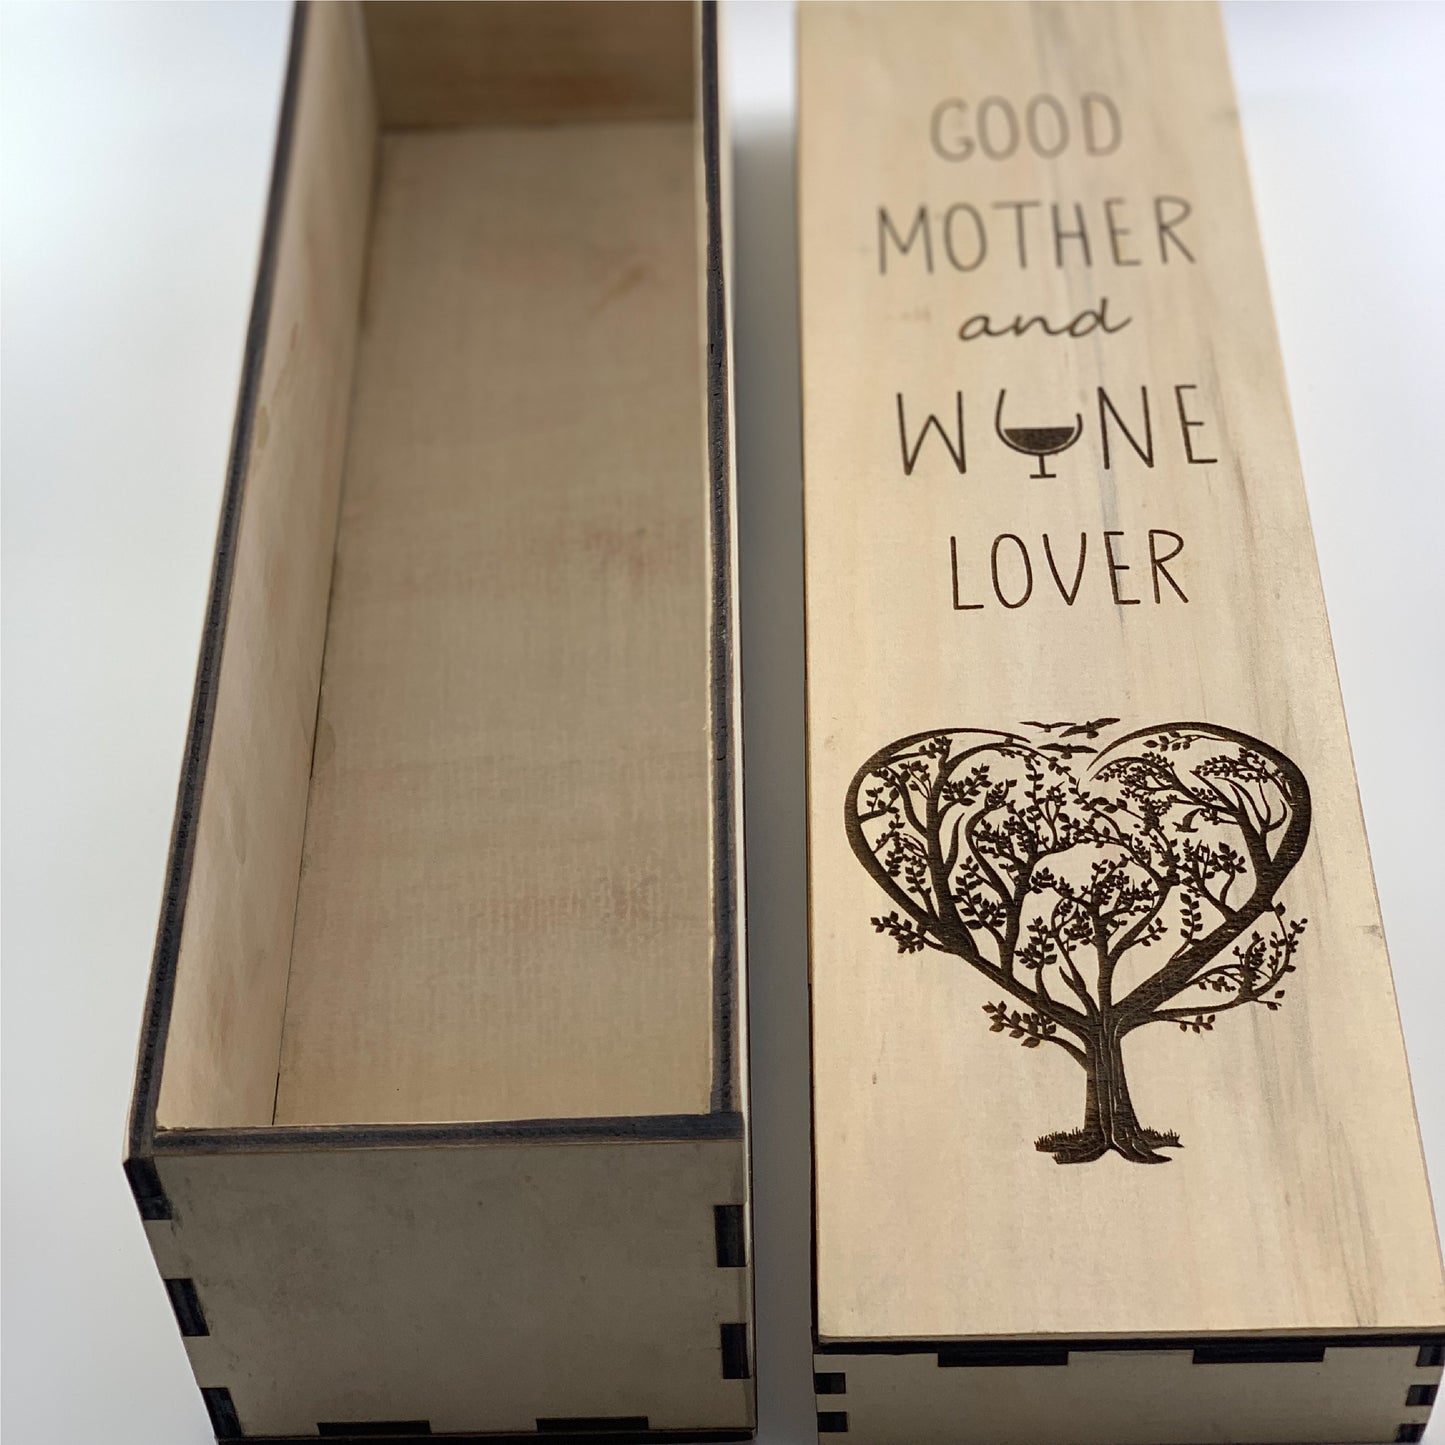 Mother's Day gift ideas, Custom wine box, Personalized gift, Unique Mother's Day present, Customizable box, Wine box gift, Mother's Day gift